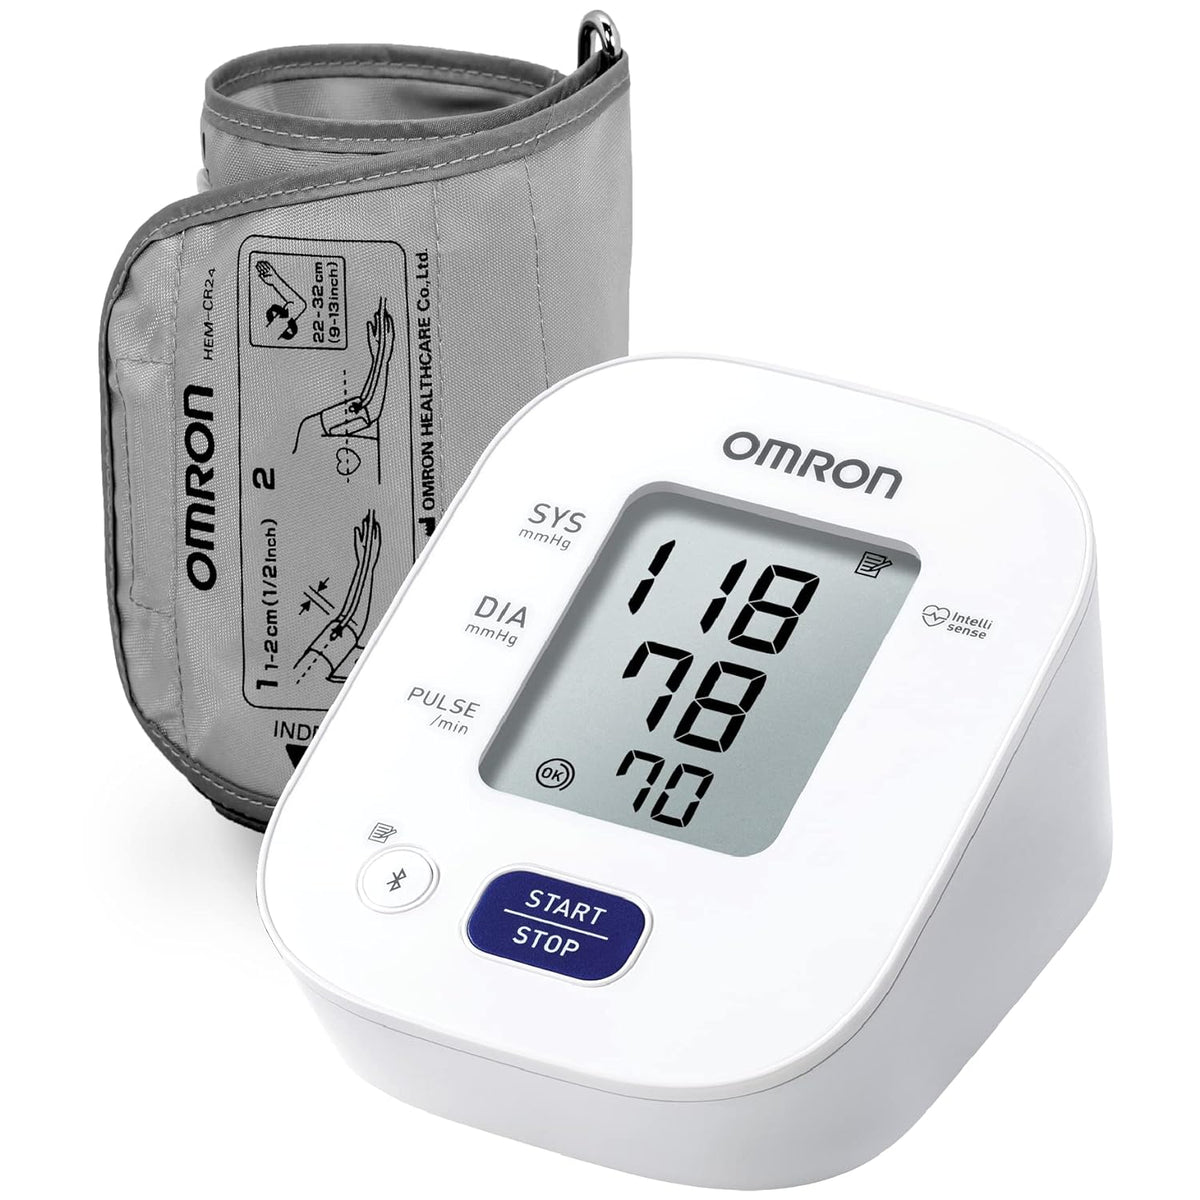 Omron HEM 7140T1 Bluetooth Blood Pressure Monitor with Cuff Wrapping Guide,Hypertension Indicator & Intellisense Technology For Most Accurate Measurement